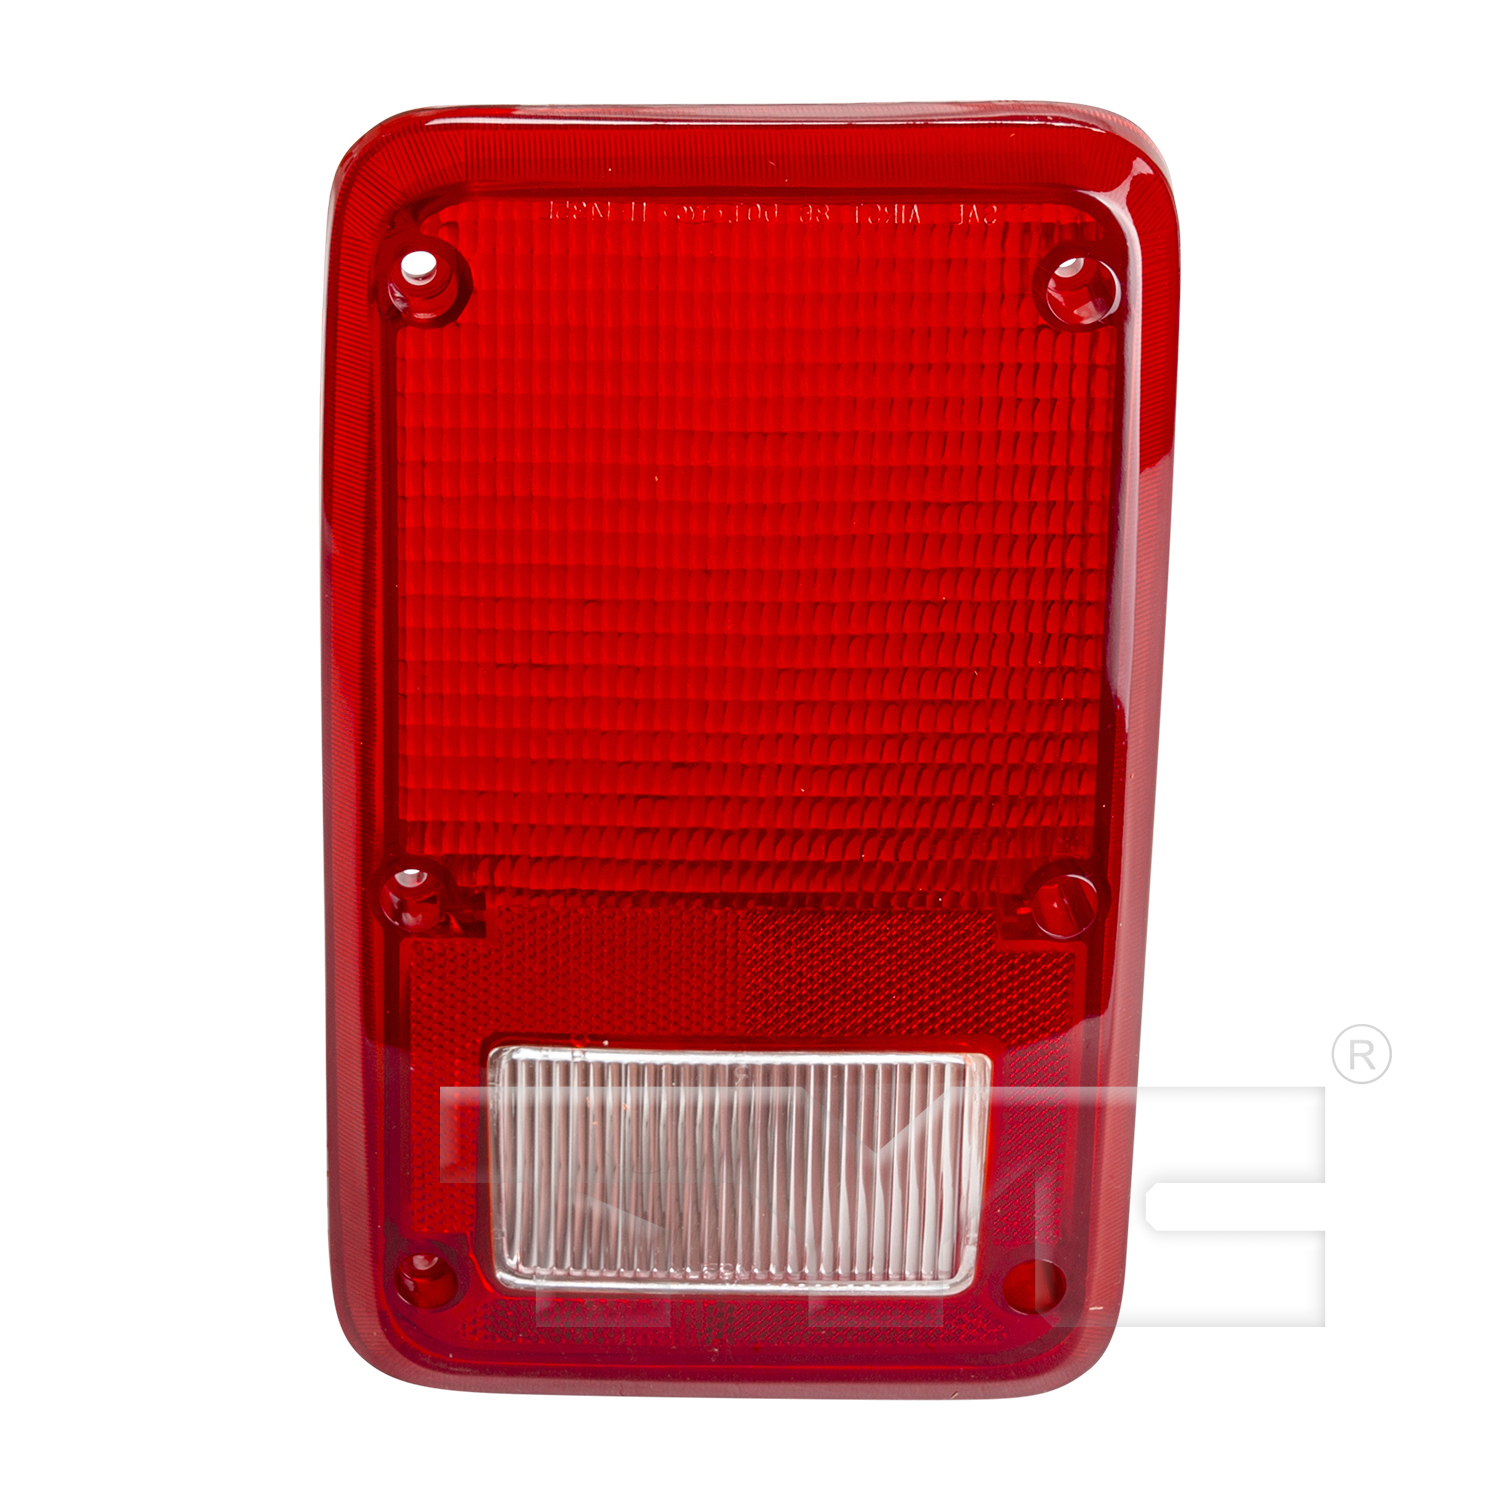 Aftermarket TAILLIGHTS for PLYMOUTH - PB250, PB250,81-83,LT Taillamp lens